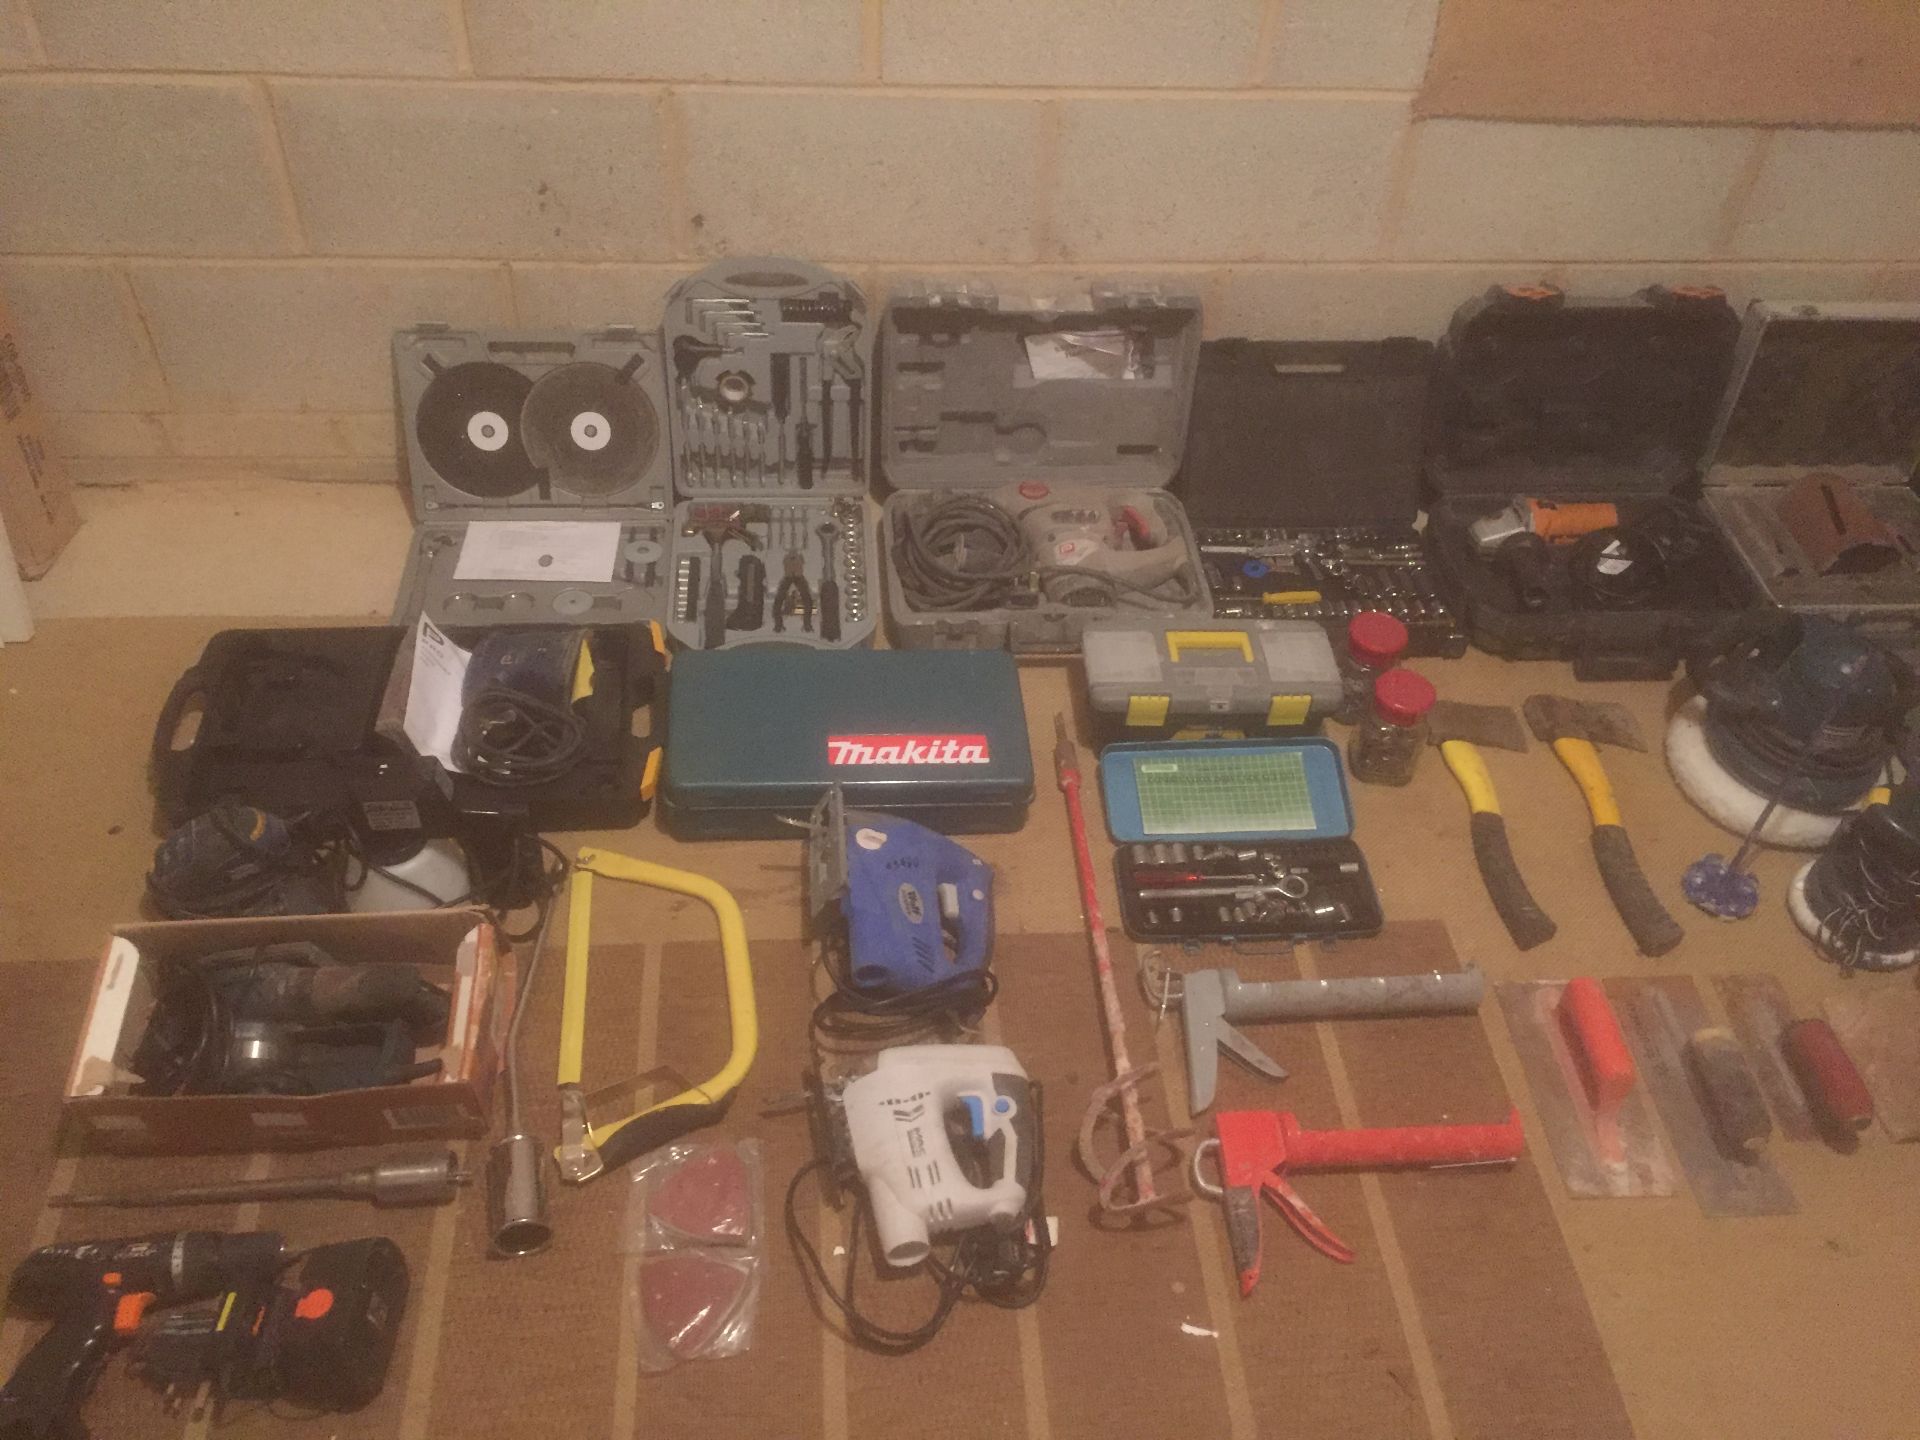 HUGE JOB LOT OF VARIOUS POWER TOOLS, HAND TOOLS, ACCESSORIES, NO RESERVE - Image 7 of 8